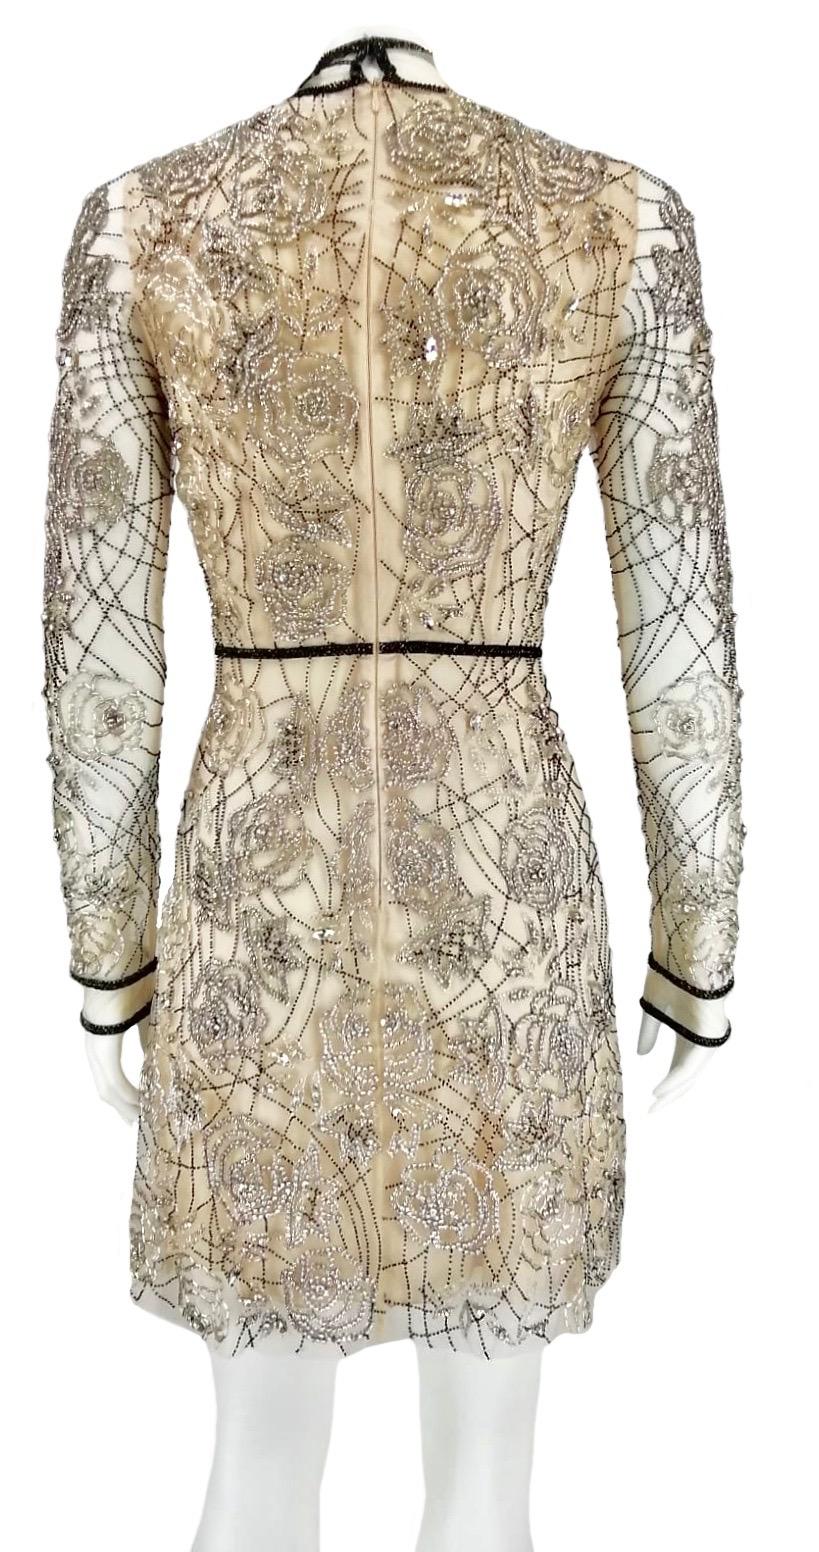 Blumarine tulle dress embroidered entirely by hand, with beads and crystals in an intertwined design of camellias, leaf shoots and ramages. Transparent with champagne silk lining. Details with black beads. Long sleeves, mandarin collar, back